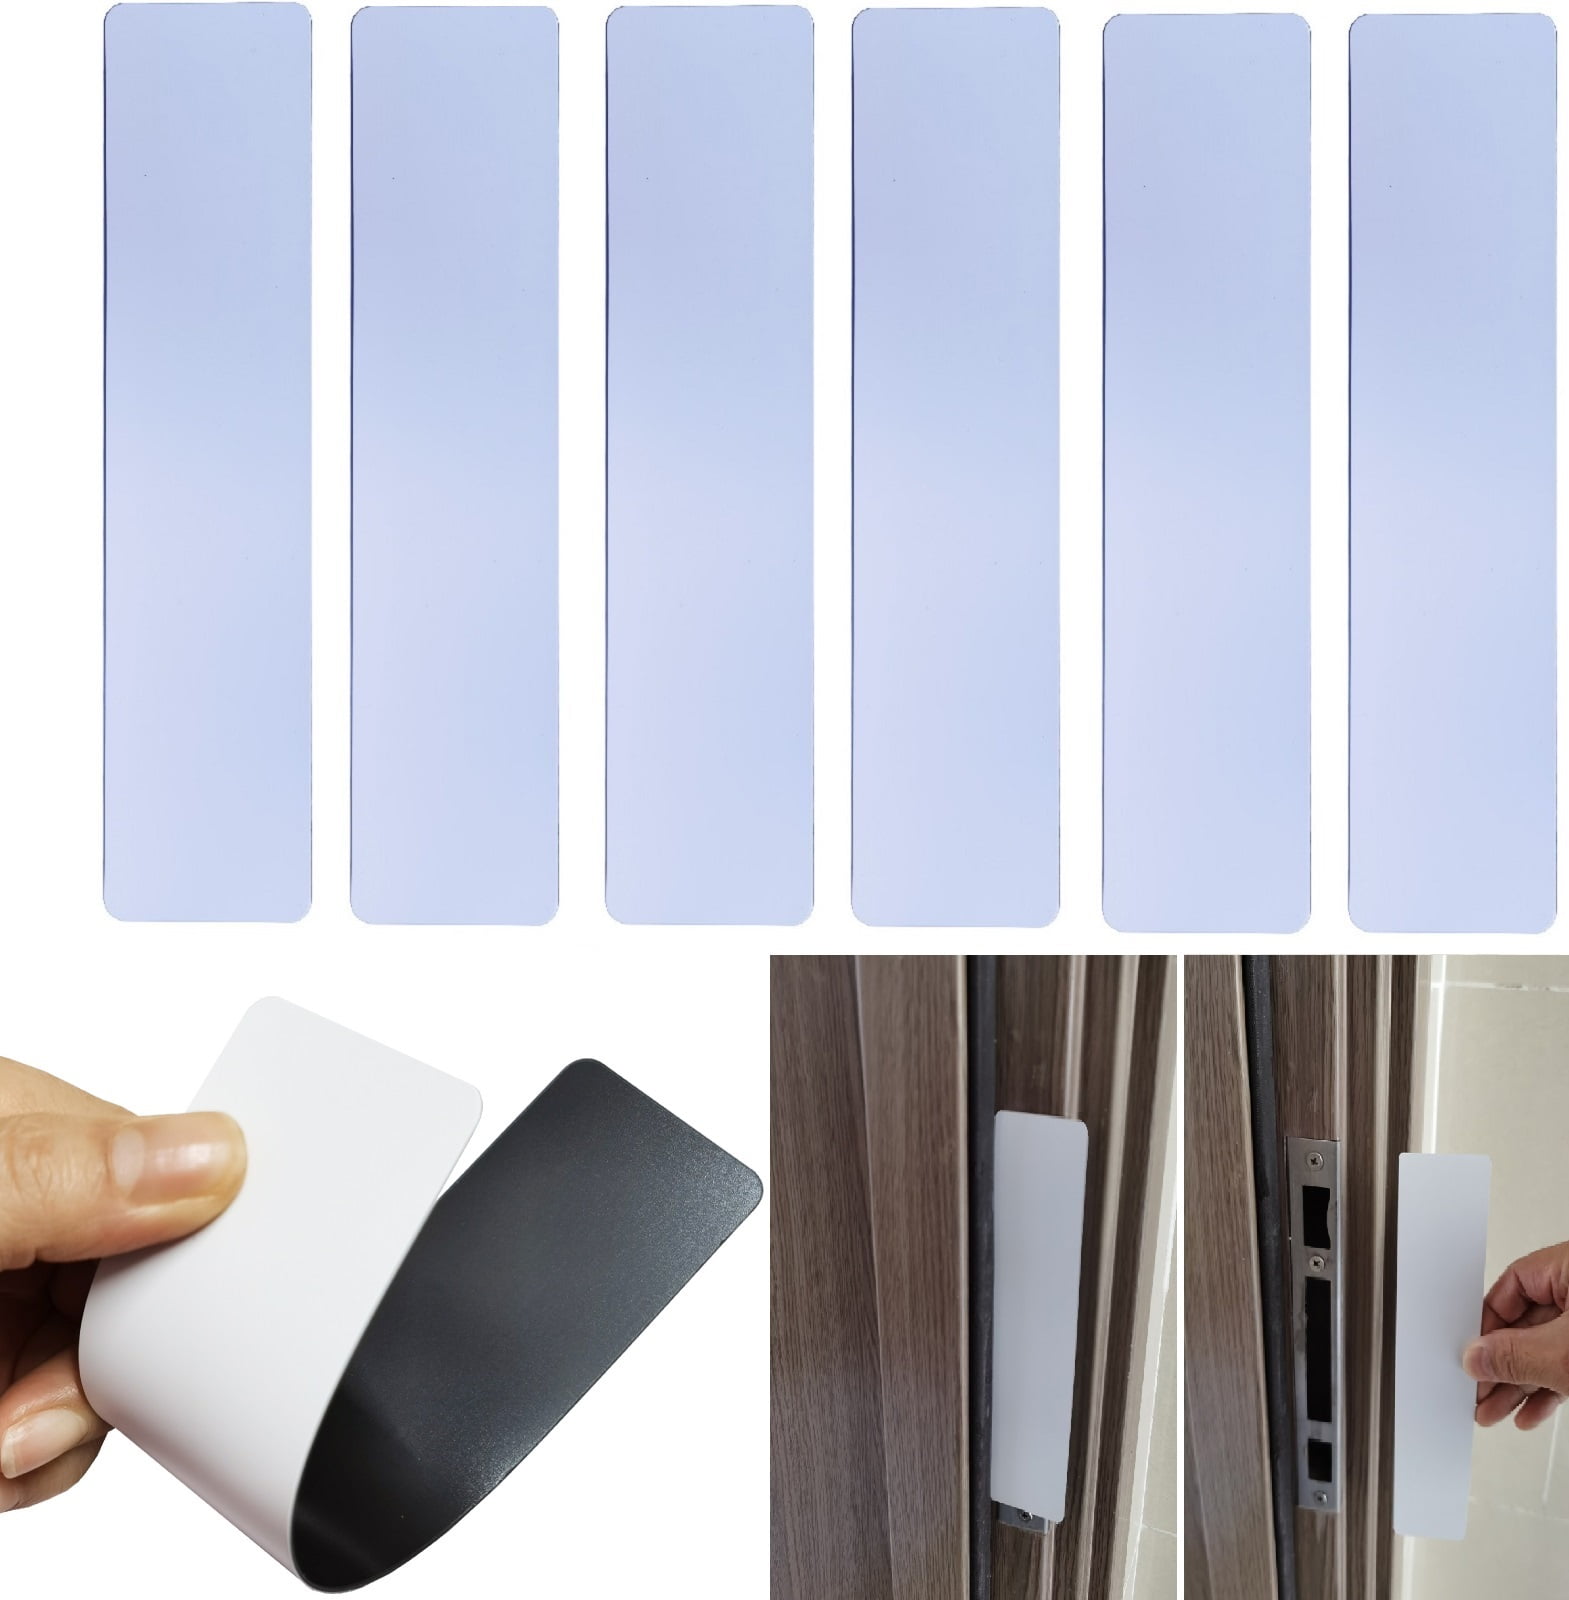 30 Pack Lockdown Magnetic Strips Door Security Devices Thin Magnetic Strips  School Office Emergency Easy Quick Lock Door Latch (30Pcs, White) 